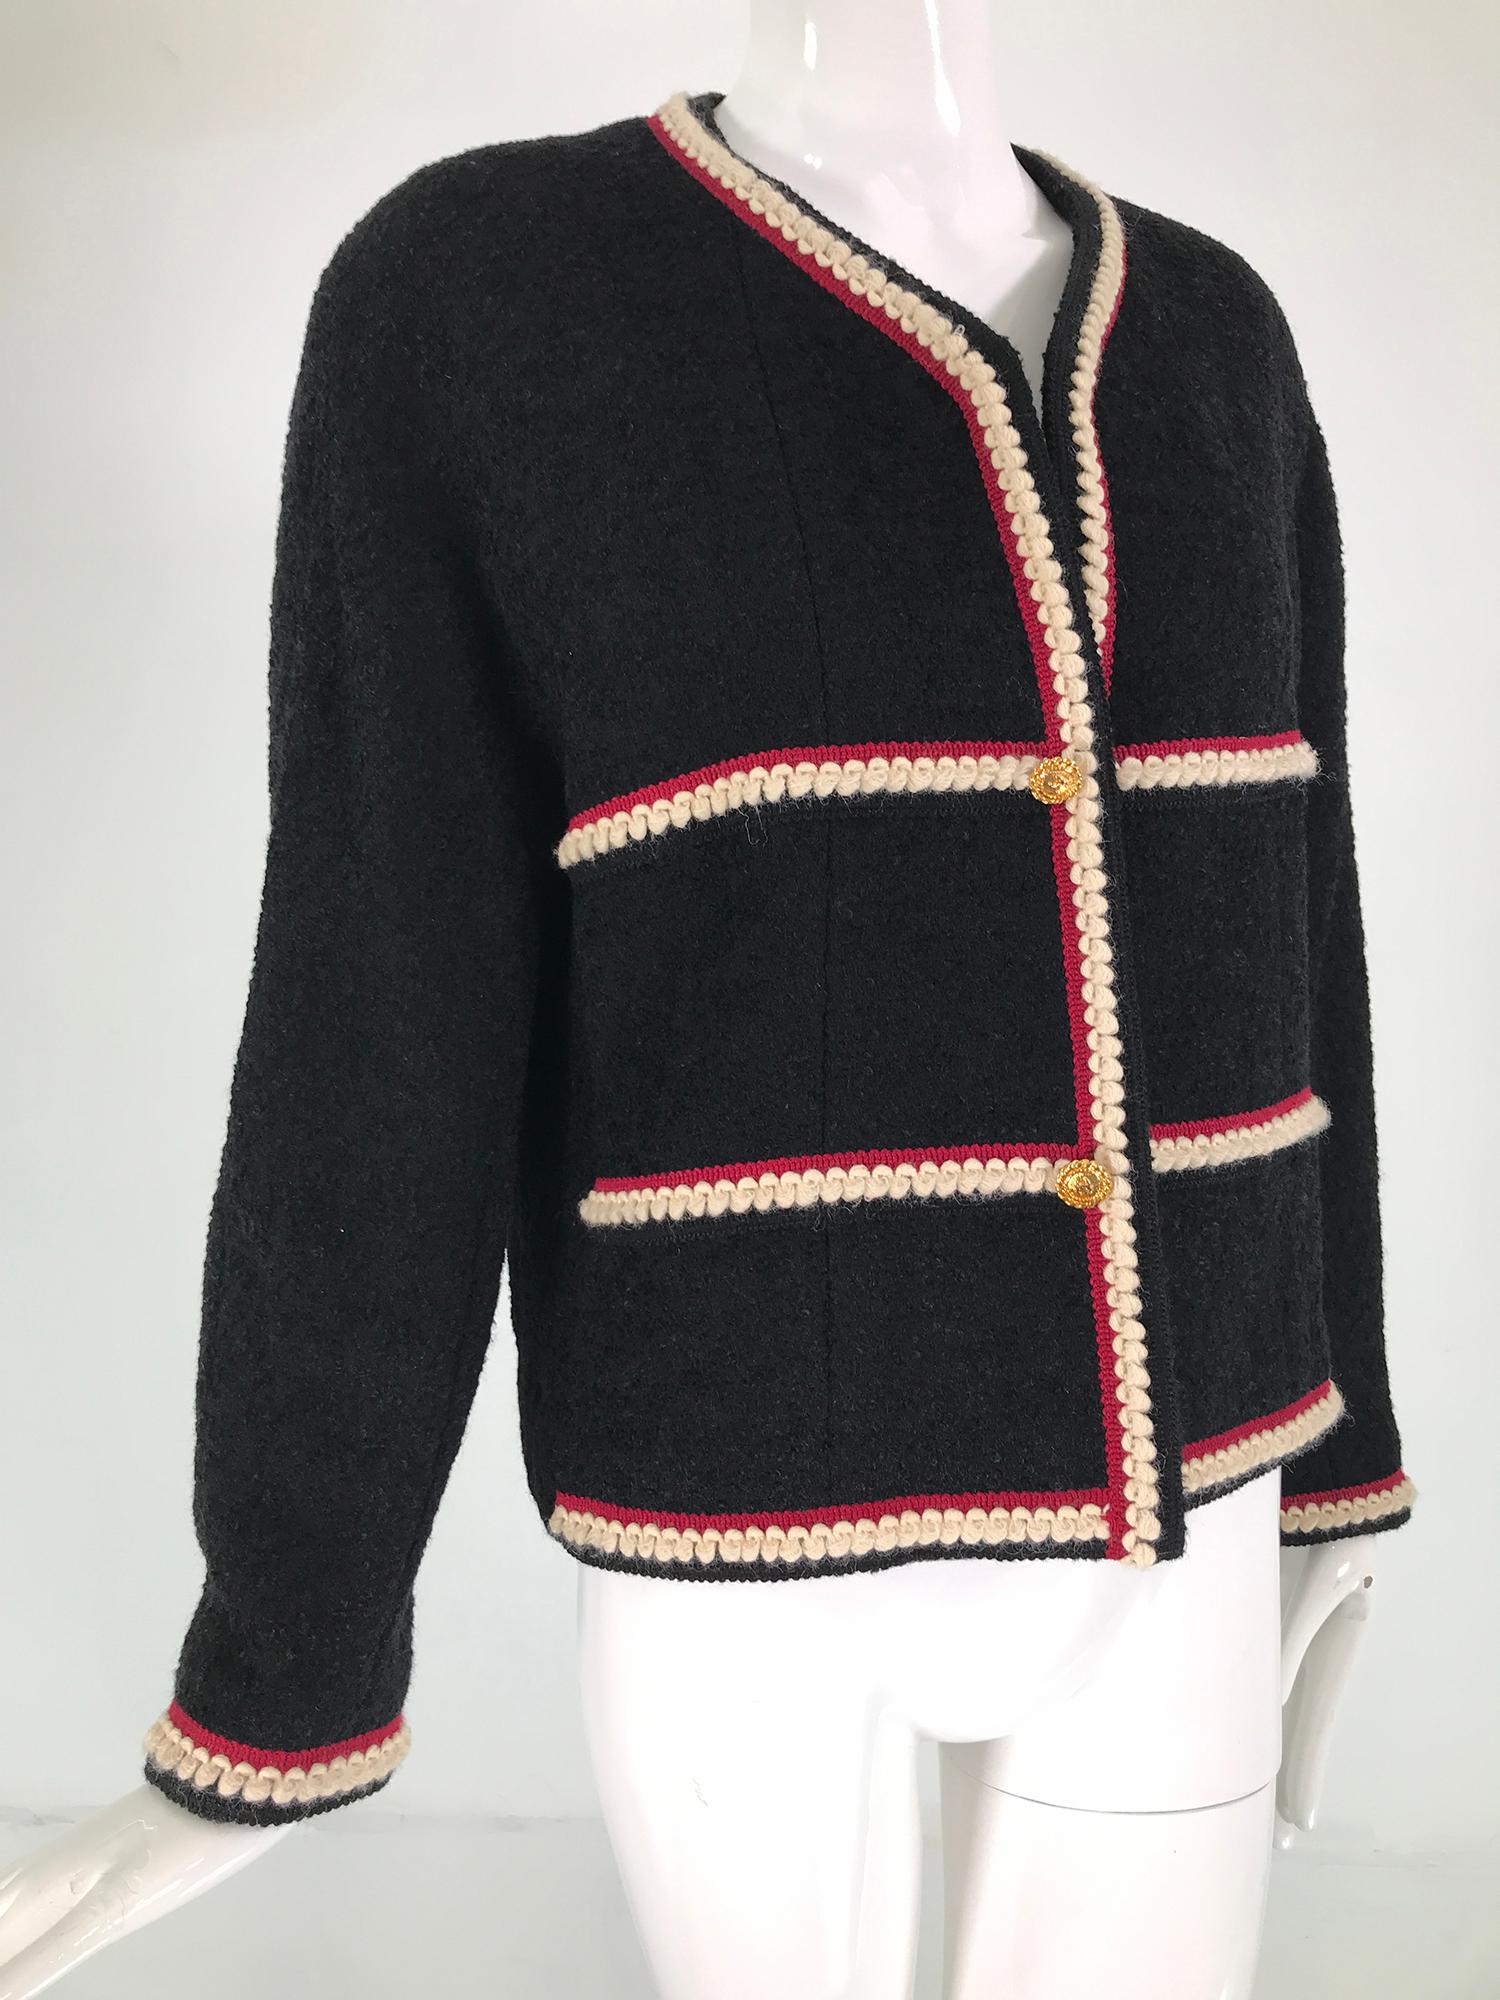 Chanel white angora & wine braid trim, black boucle jacket from the 1990s. The trim, a row of wine braid & below, loop braid of white angora. The jacket has 2 non working gold Chanel buttons at the front with hidden hook & eyes behind, there are 